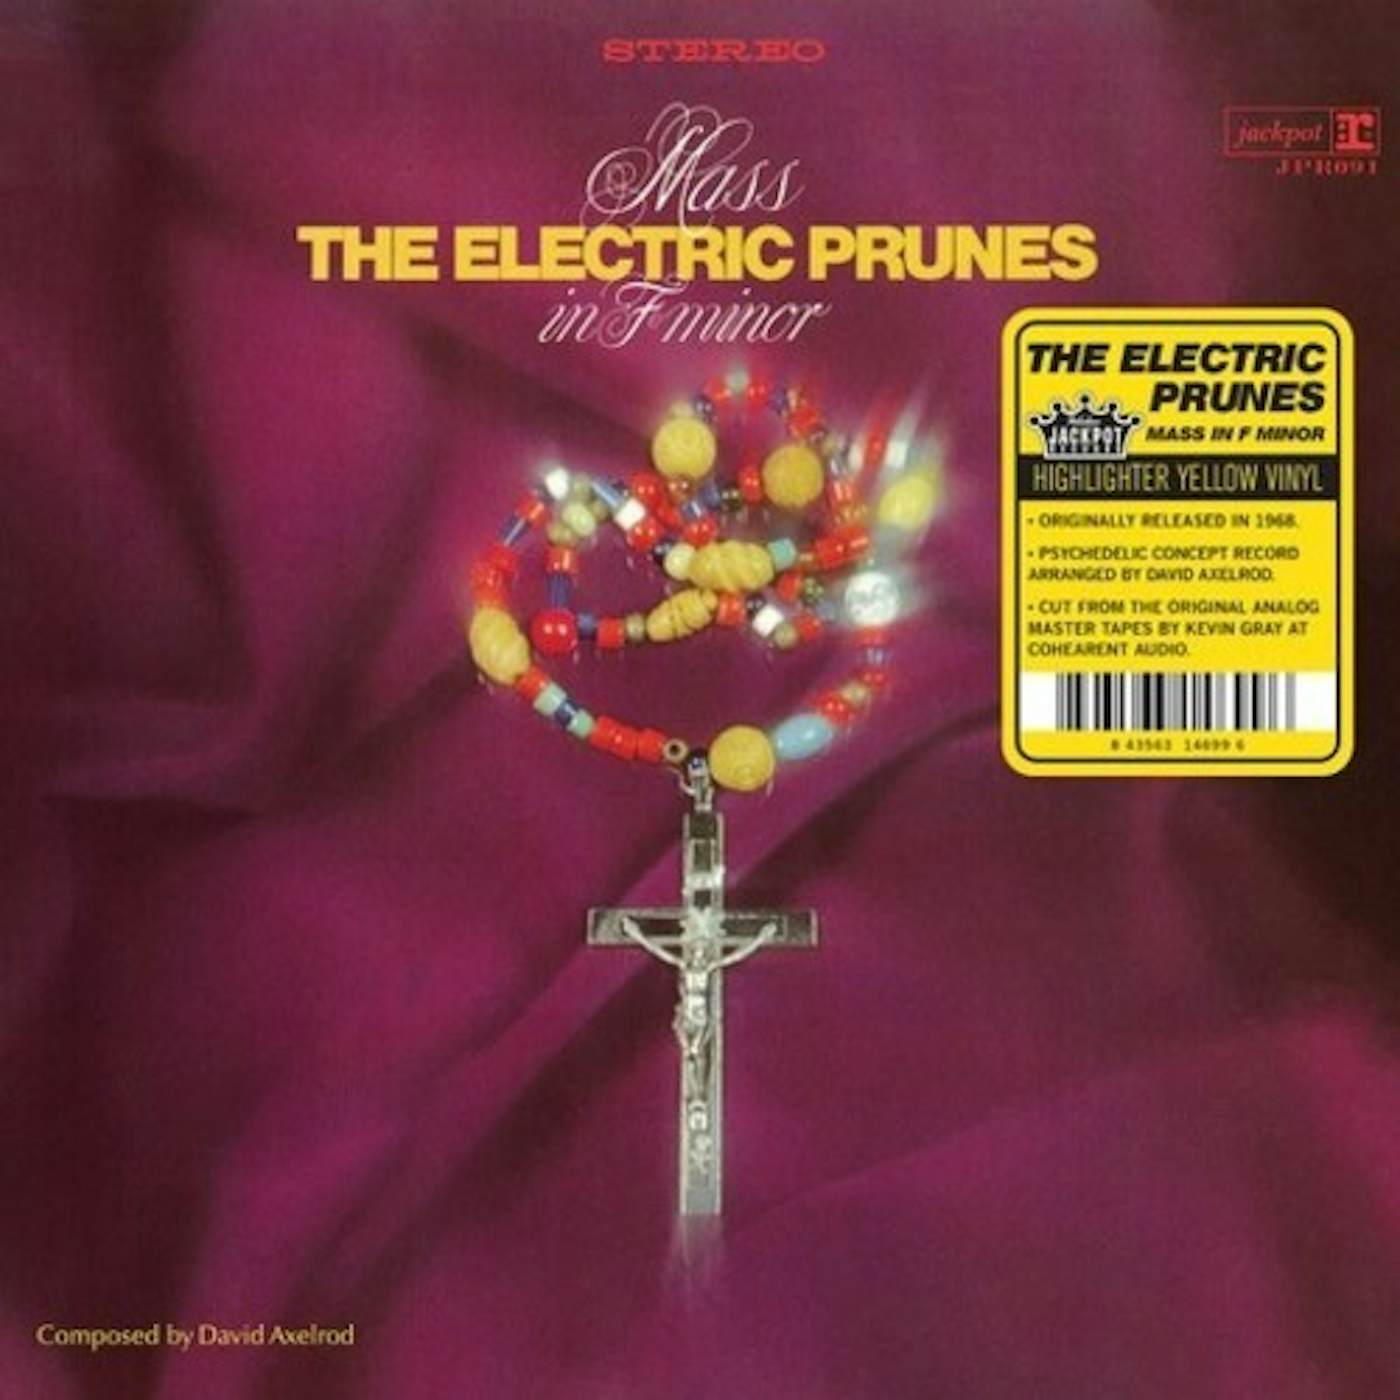 The Electric Prunes MASS IN F MINOR Vinyl Record